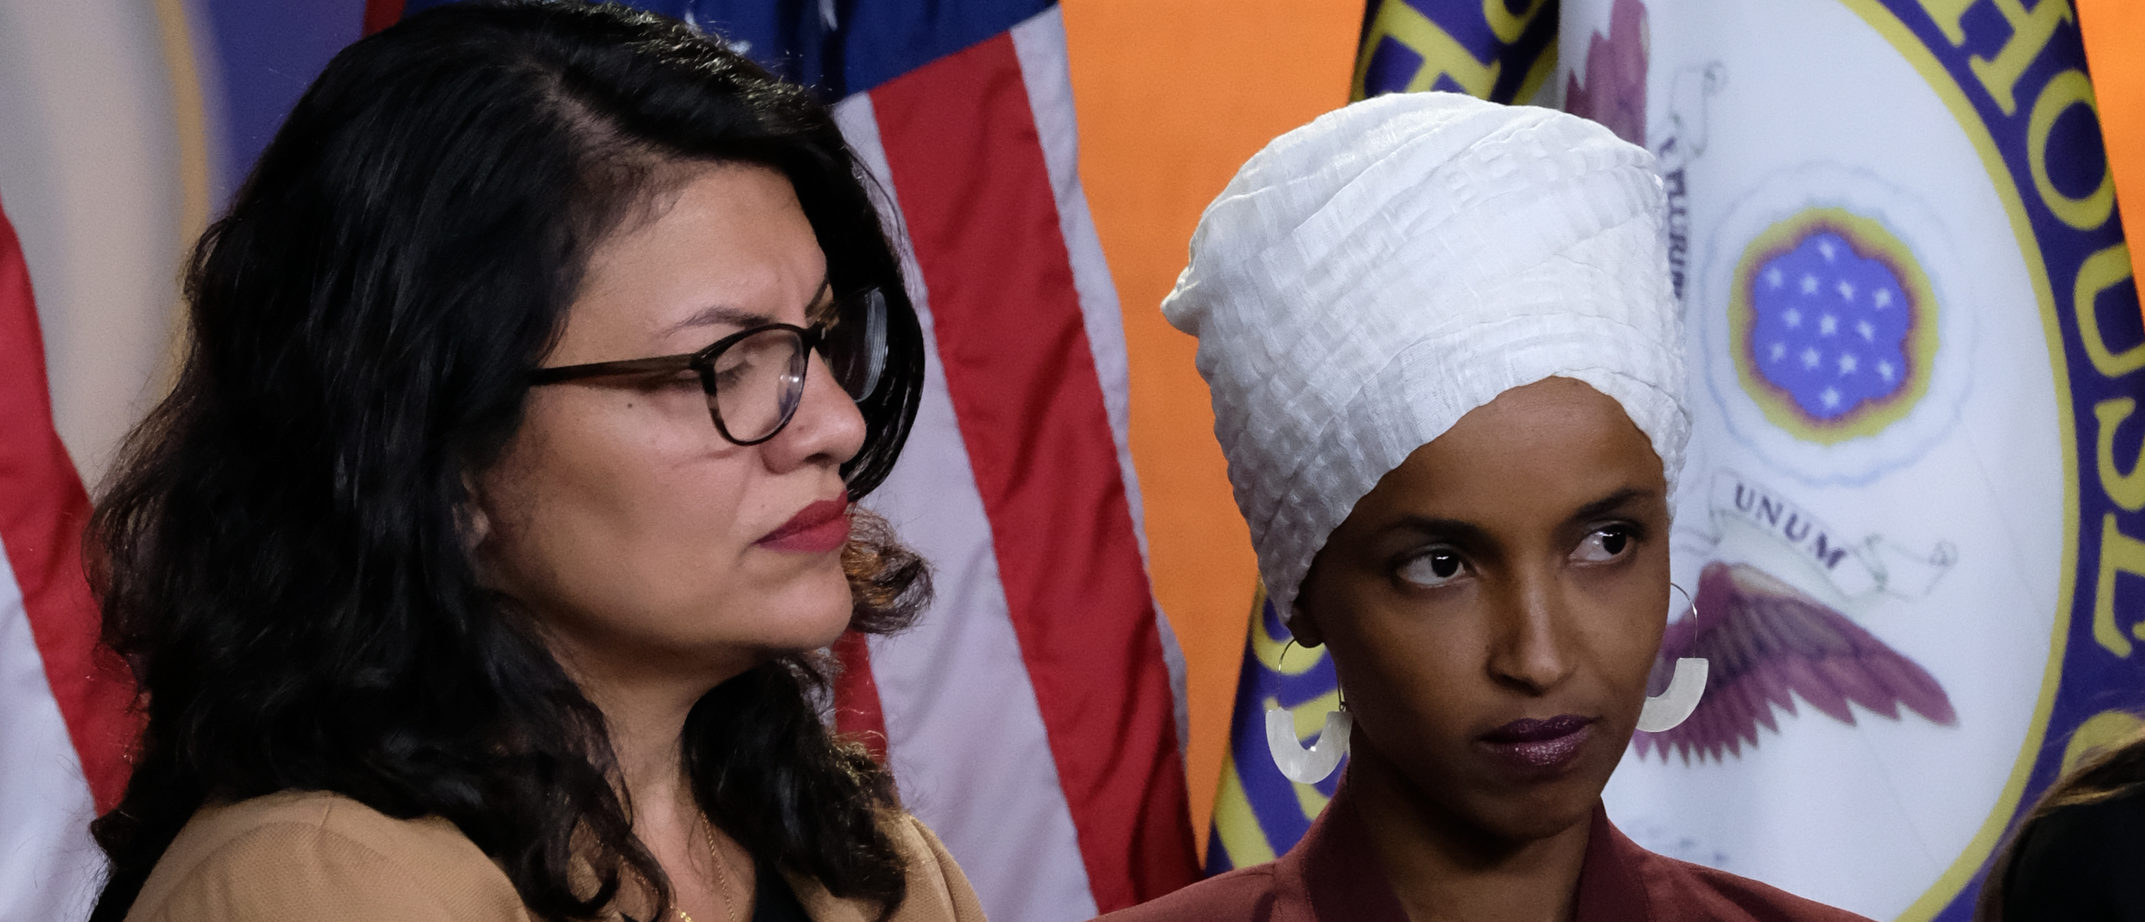 U.S. Reps. Rashida Tlaib, Ilhan Omar and Alexandria Ocasio-Cortez listen during a news conference at the U.S. Capitol on July 15, 2019 in Washington, D.C. (Photo by Alex Wroblewski/Getty Images)